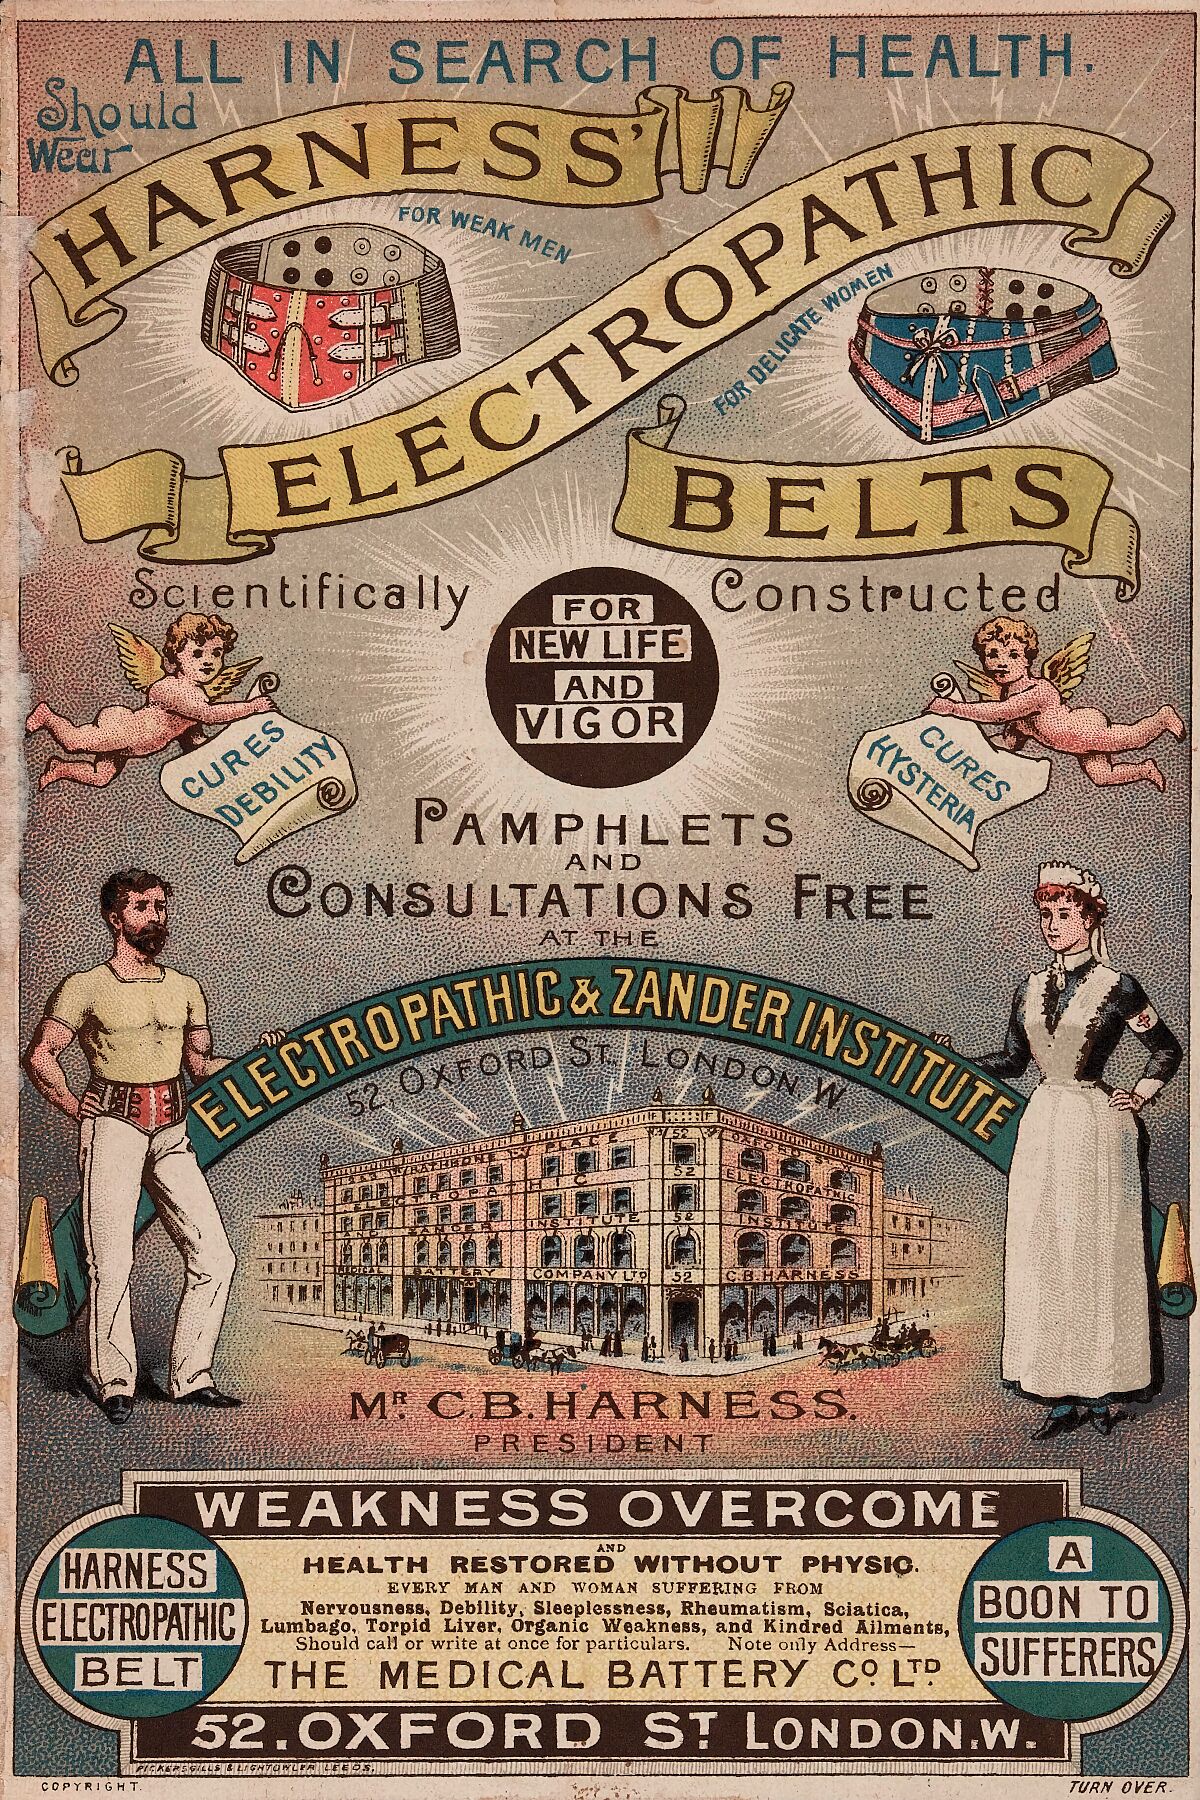 All in search of health should wear Harness' electropathic belts - scientifically constructed for new life and vigor - C.B. Harness. Harness, C. B. Date - 1890